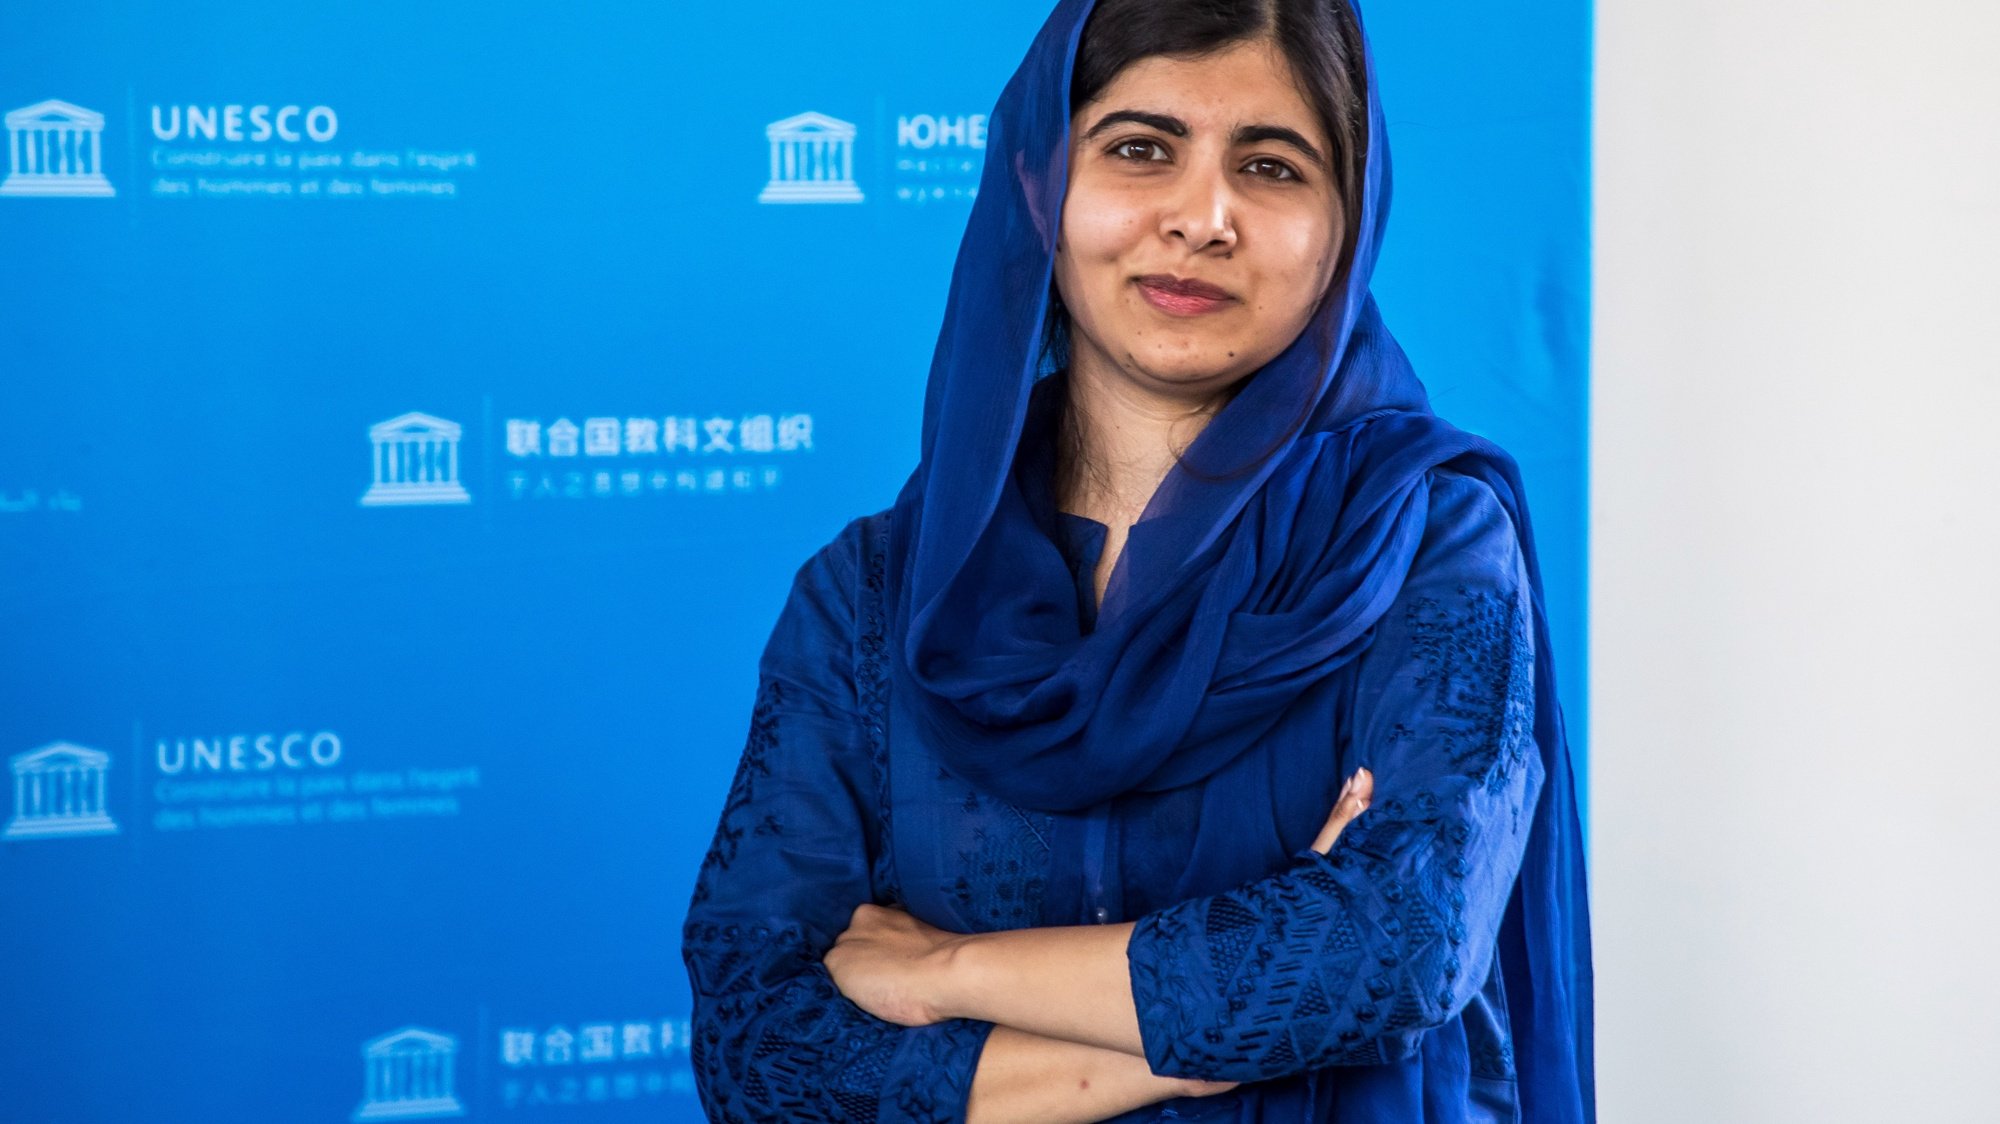 epa07697963 Nobel Peace Prize laureate Malala Yousafzai poses on the sidelines of the Education and development G7 ministers Summit, in Paris, France, 05 July 2019. France is hosting the rotating presidency of the G7 in 2019. The 45th G7 Summit will be held in August in Biarritz.  EPA/CHRISTOPHE PETIT TESSON / POOL